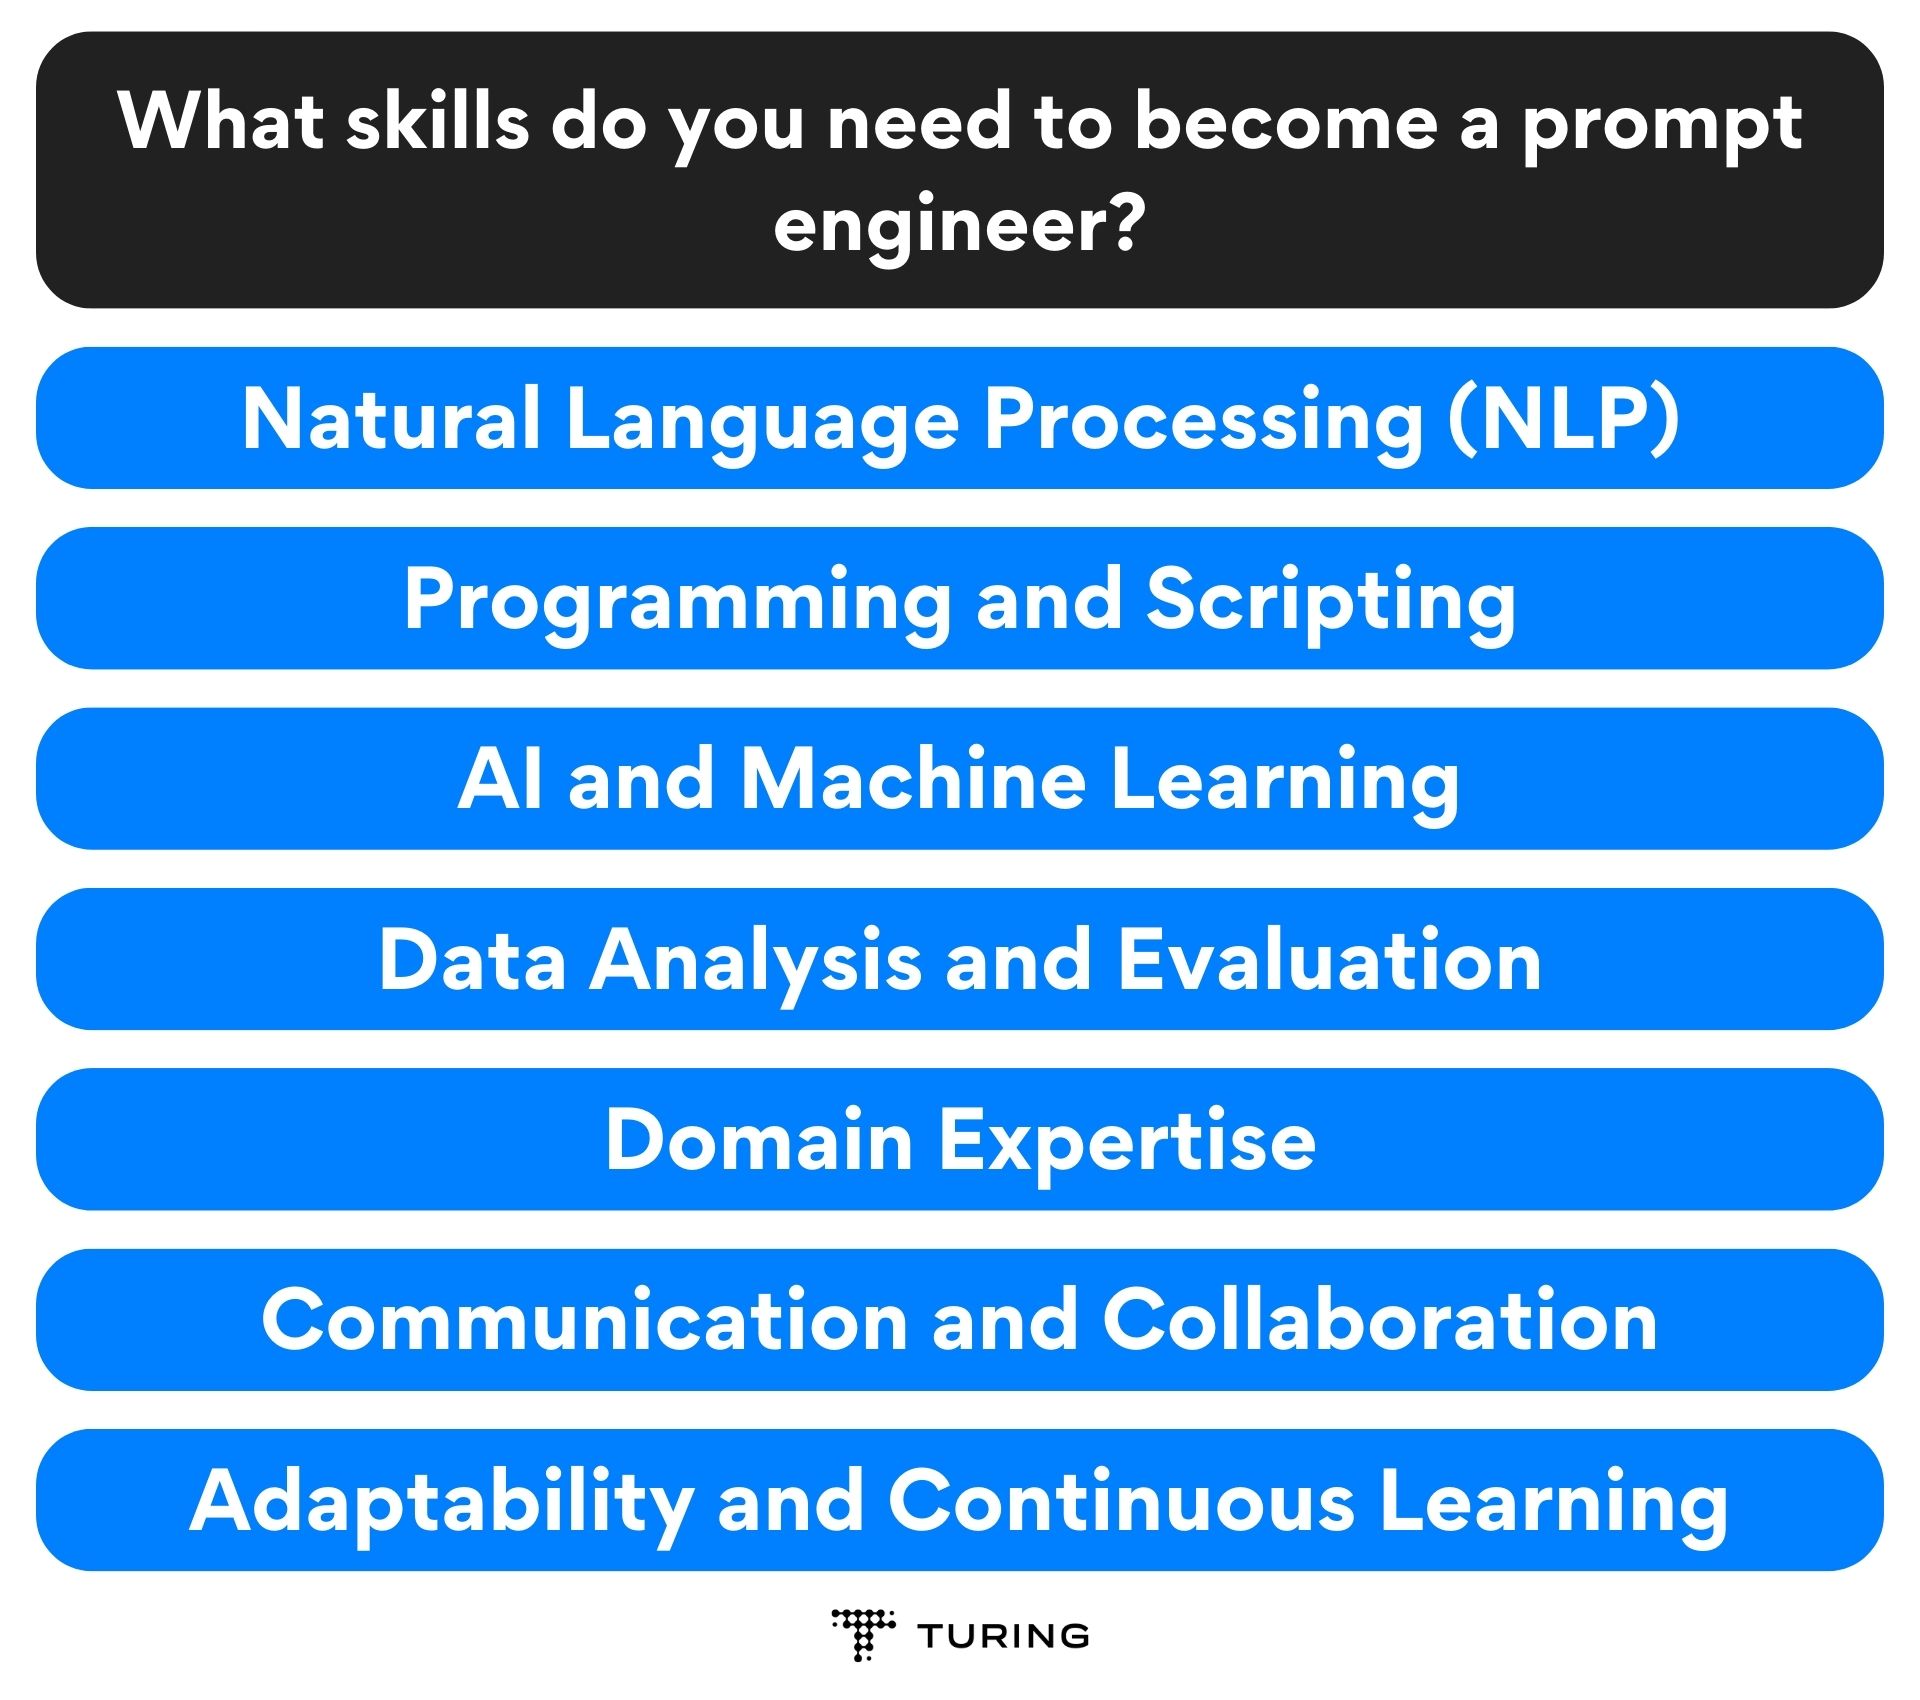 What skills do you need to become a prompt engineer